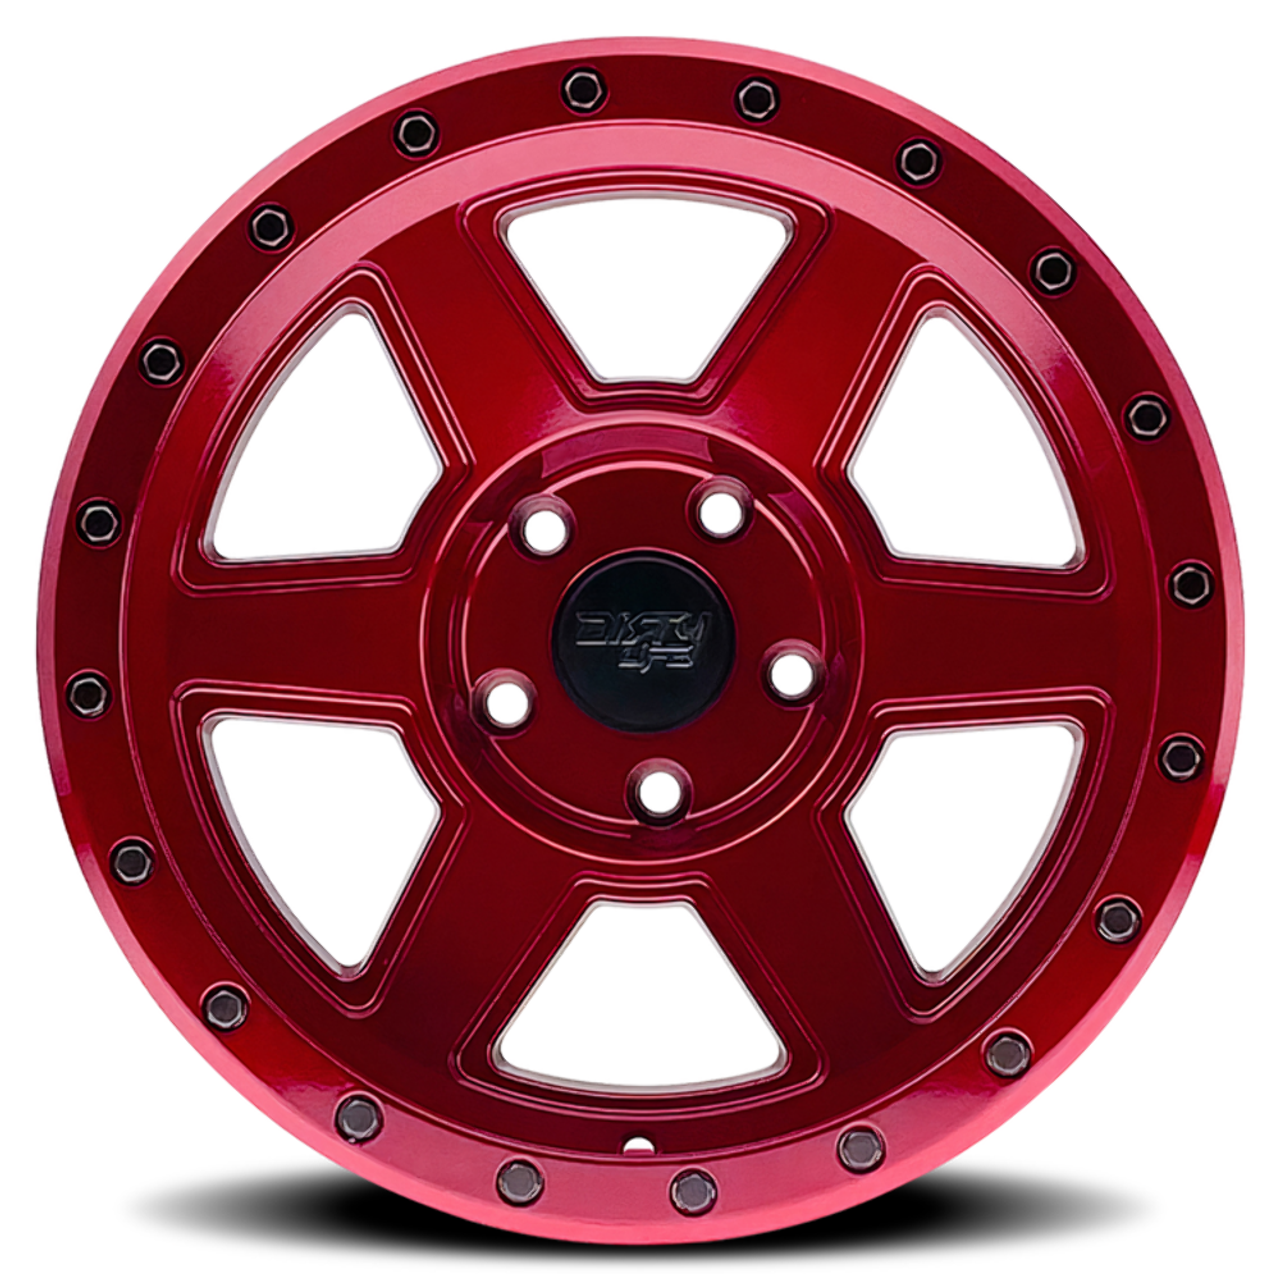 17" Dirty Life Compound 17x9 Crimson Candy Red 6x5.5 Wheel -38mm Lifted Rim